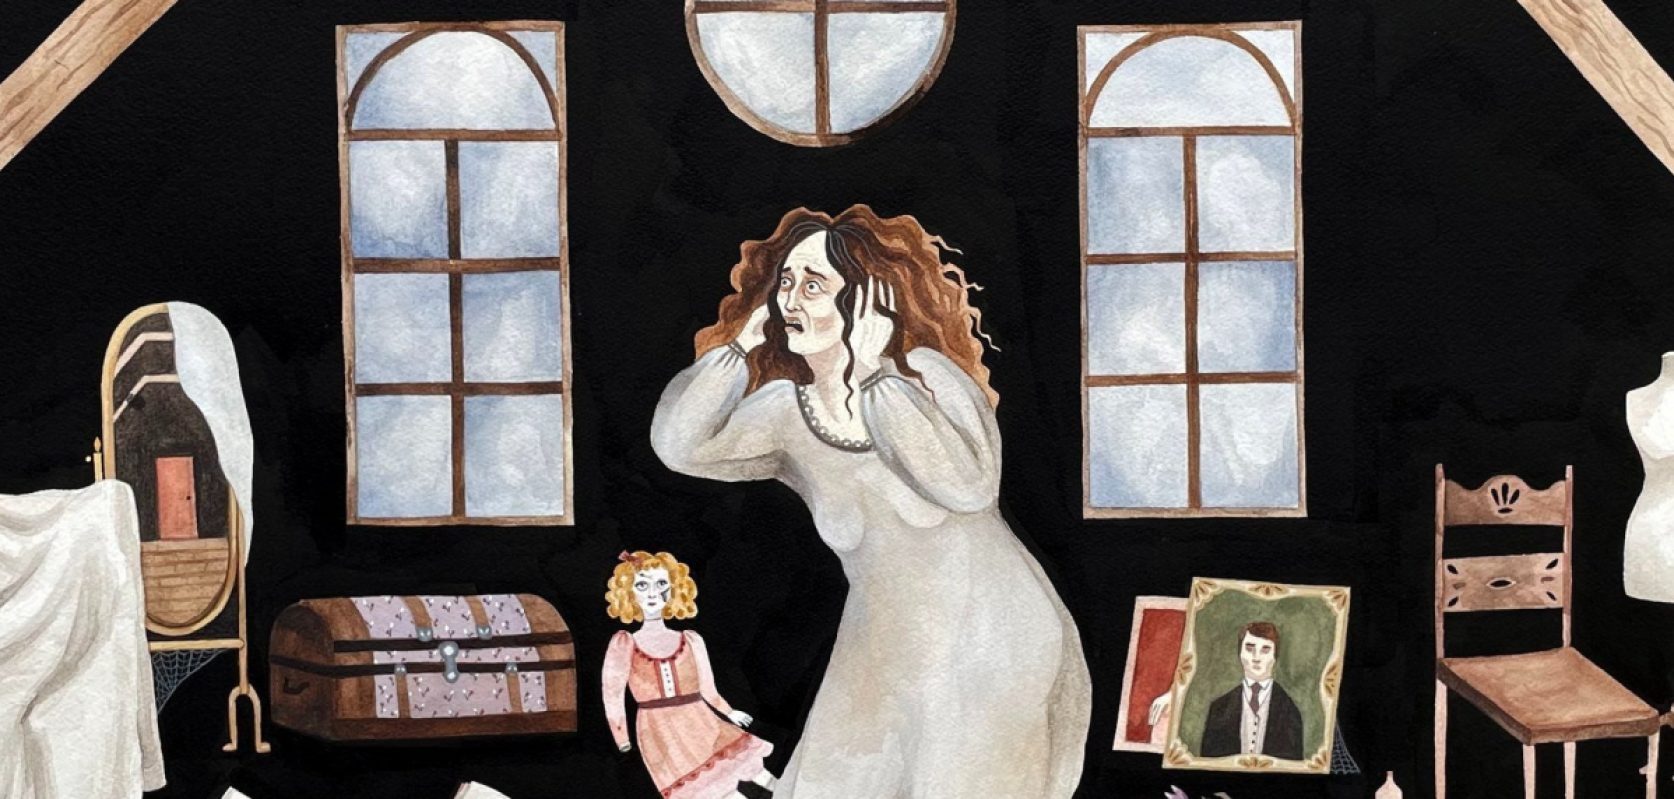 A woman crouches in an attic and clutches her head in distress. Detail from Katy Horan's "In the Attic."